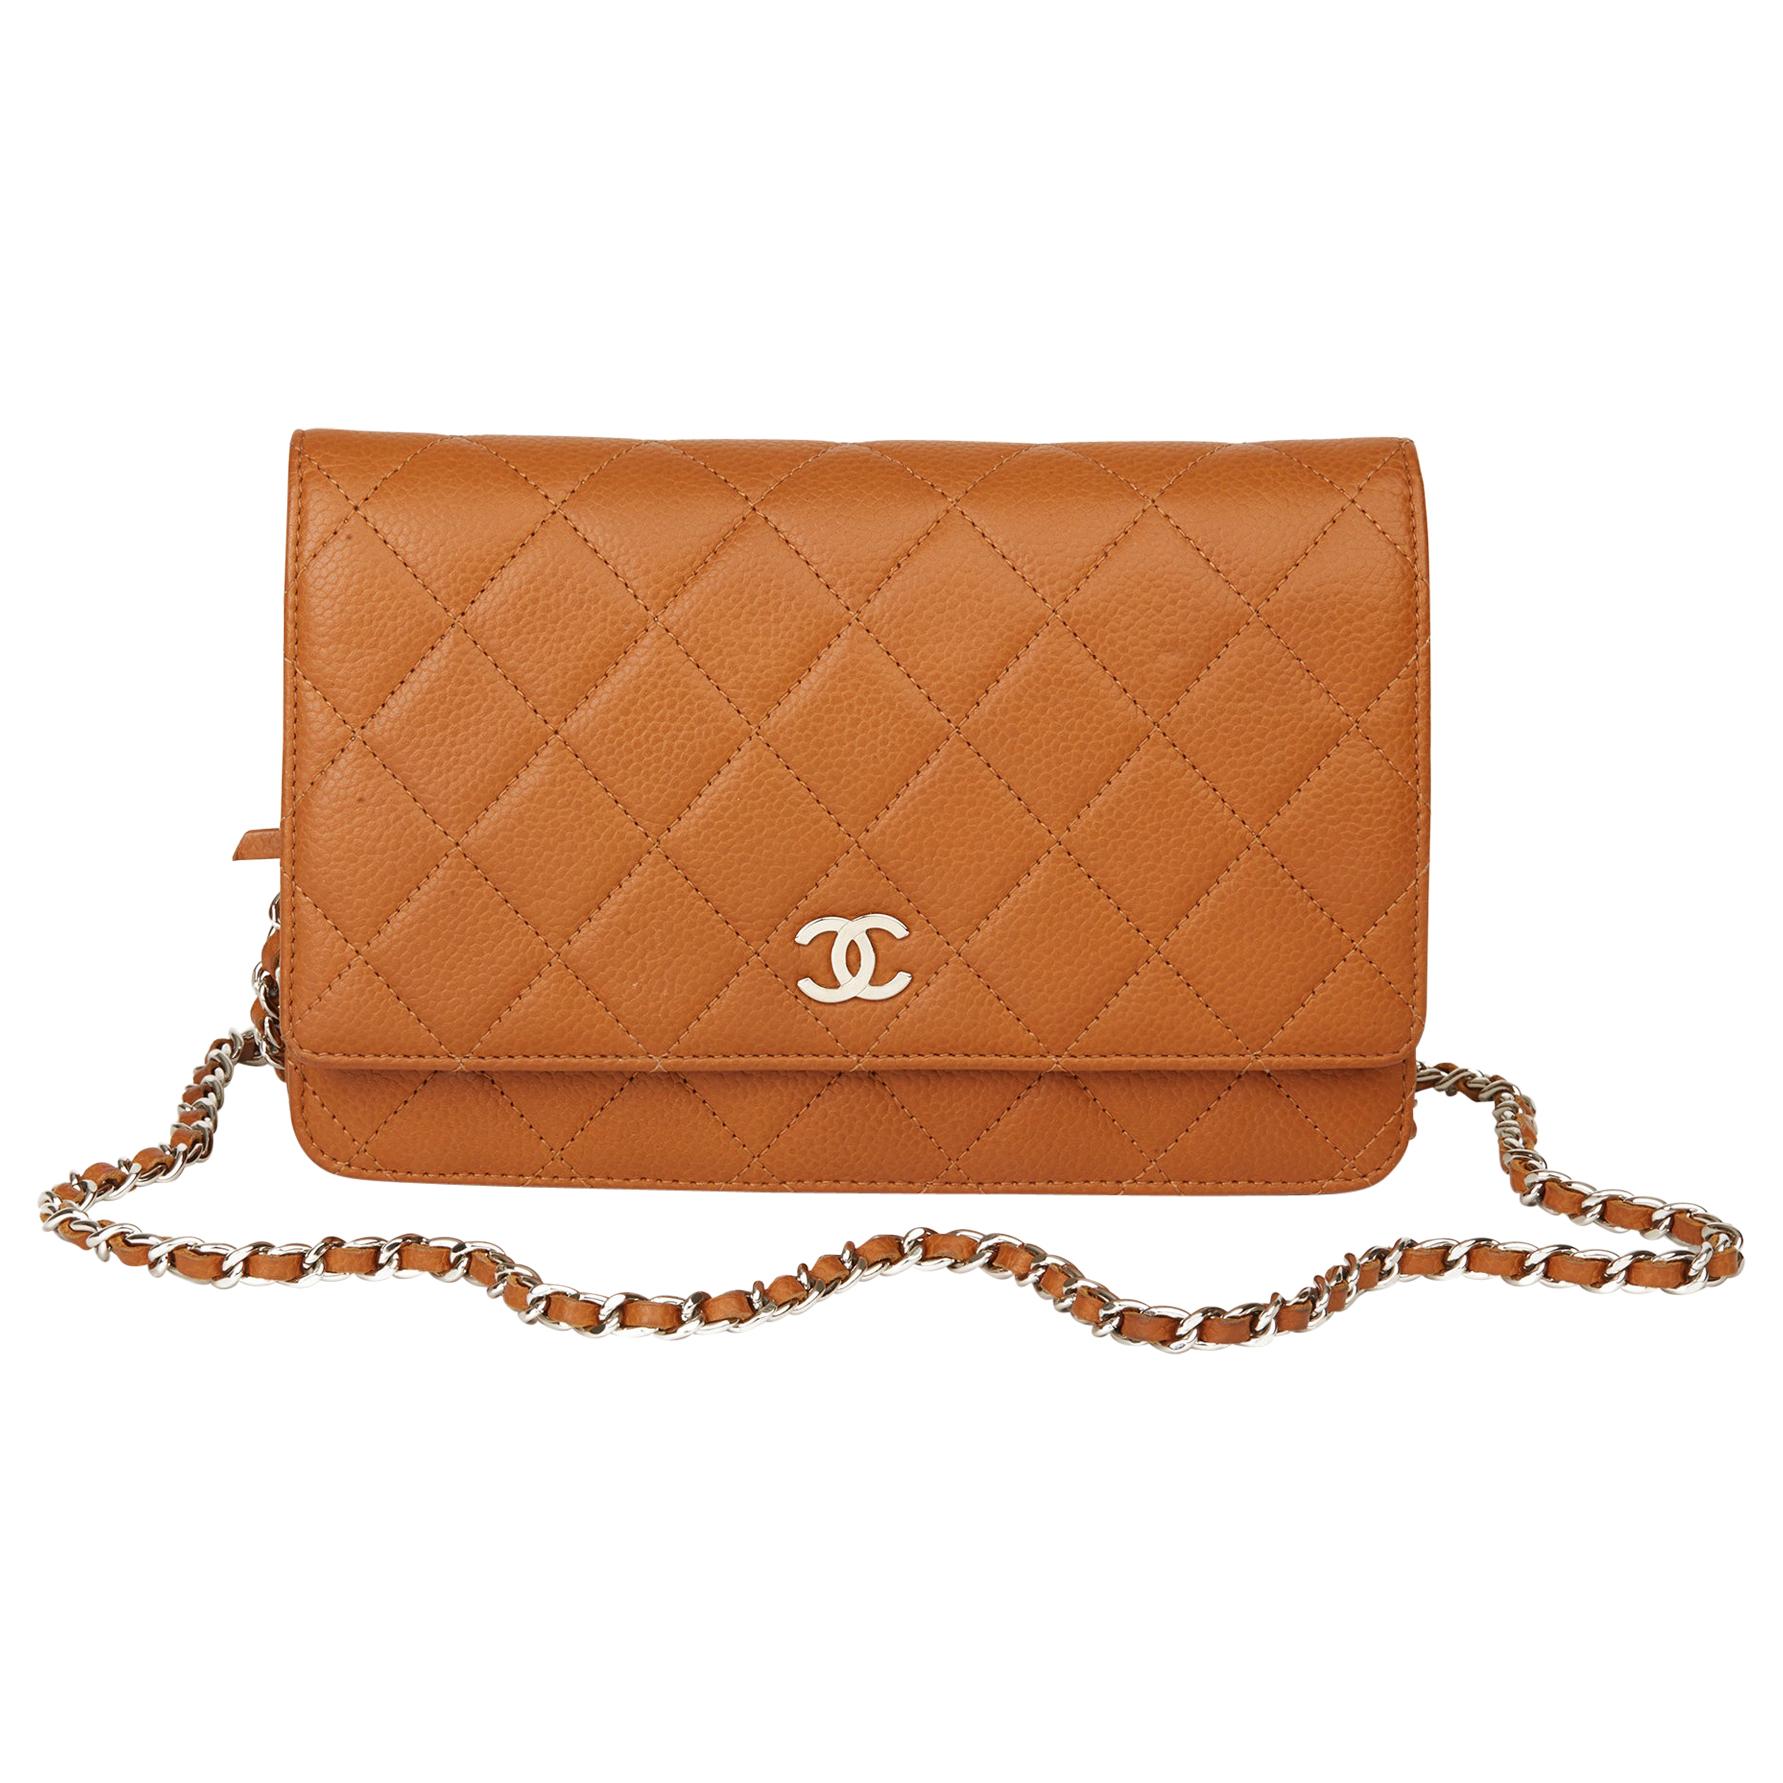 2011 Chanel Honey Beige Quilted Caviar Leather Wallet-on-Chain WOC